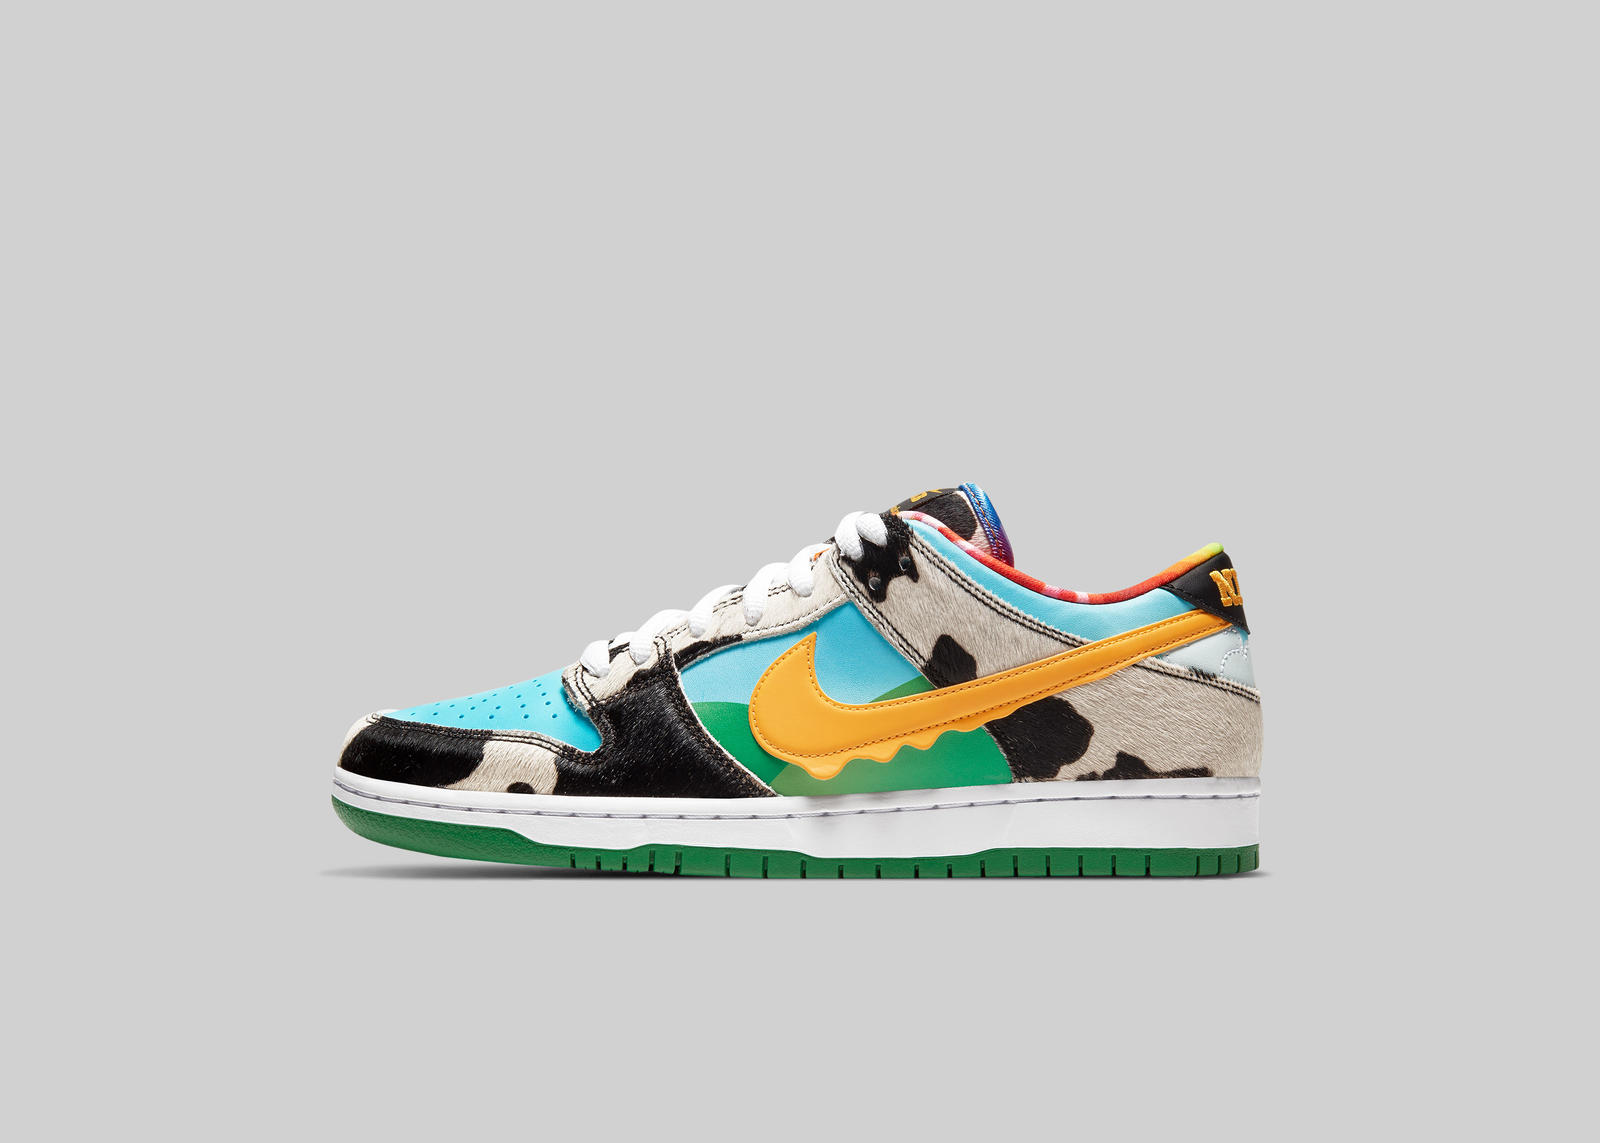 Sneakerheads Clown Nike’s SNKRS App After Missing Out On Ben & Jerry